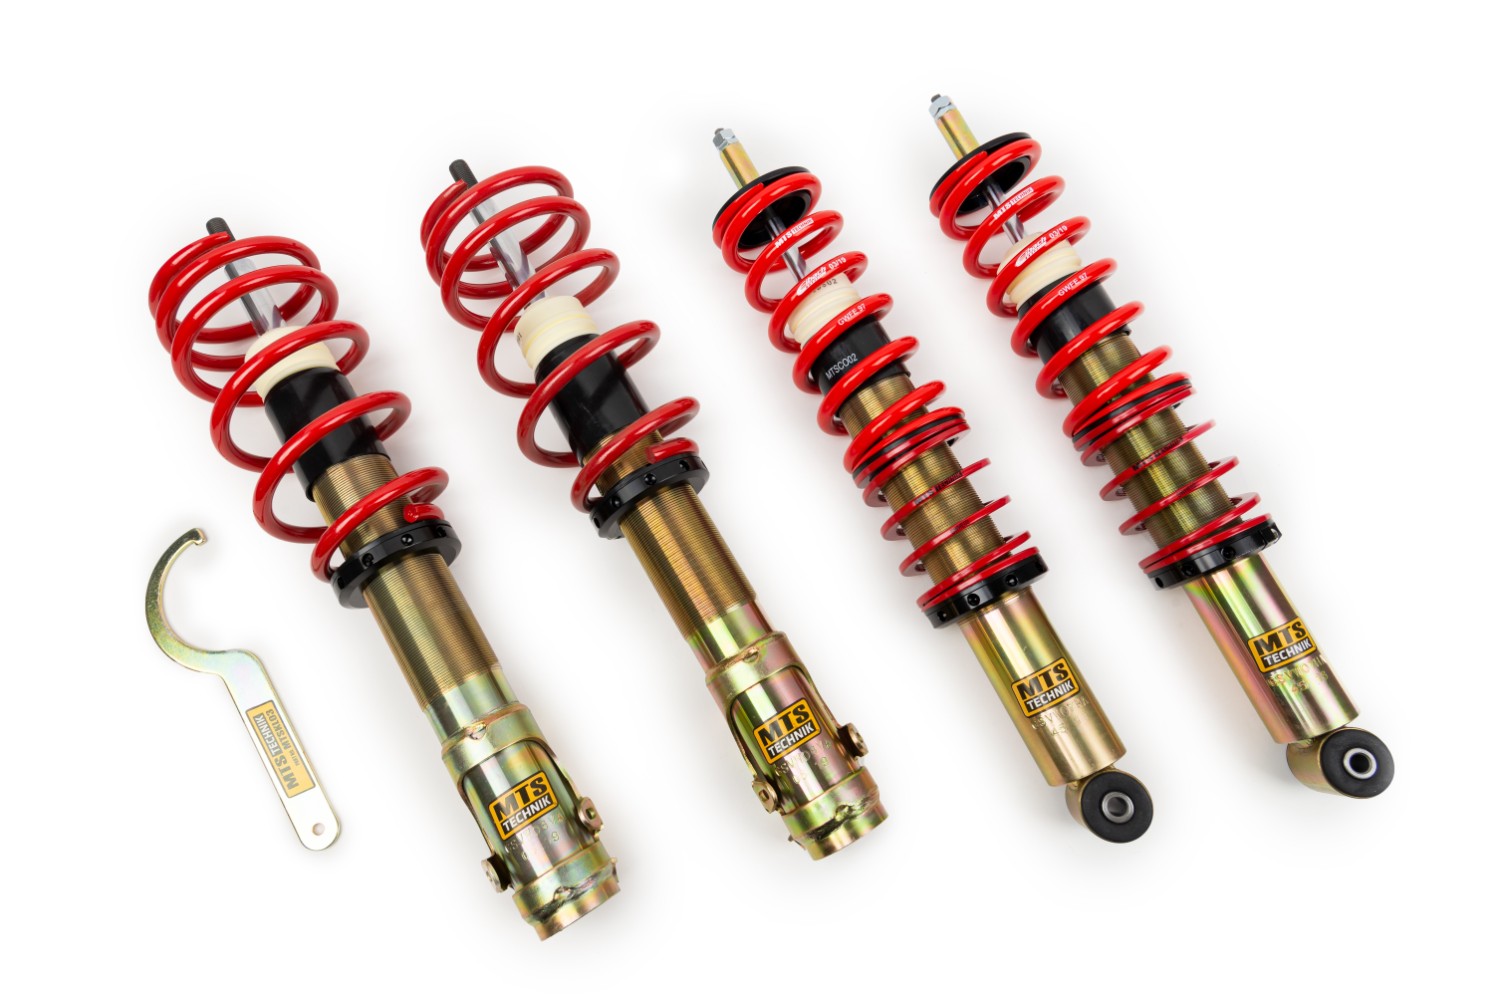 FOR AUDI A3 8P COILOVER ADJUSTABLE SUSPENSION KIT COILOVERS 30/60mm